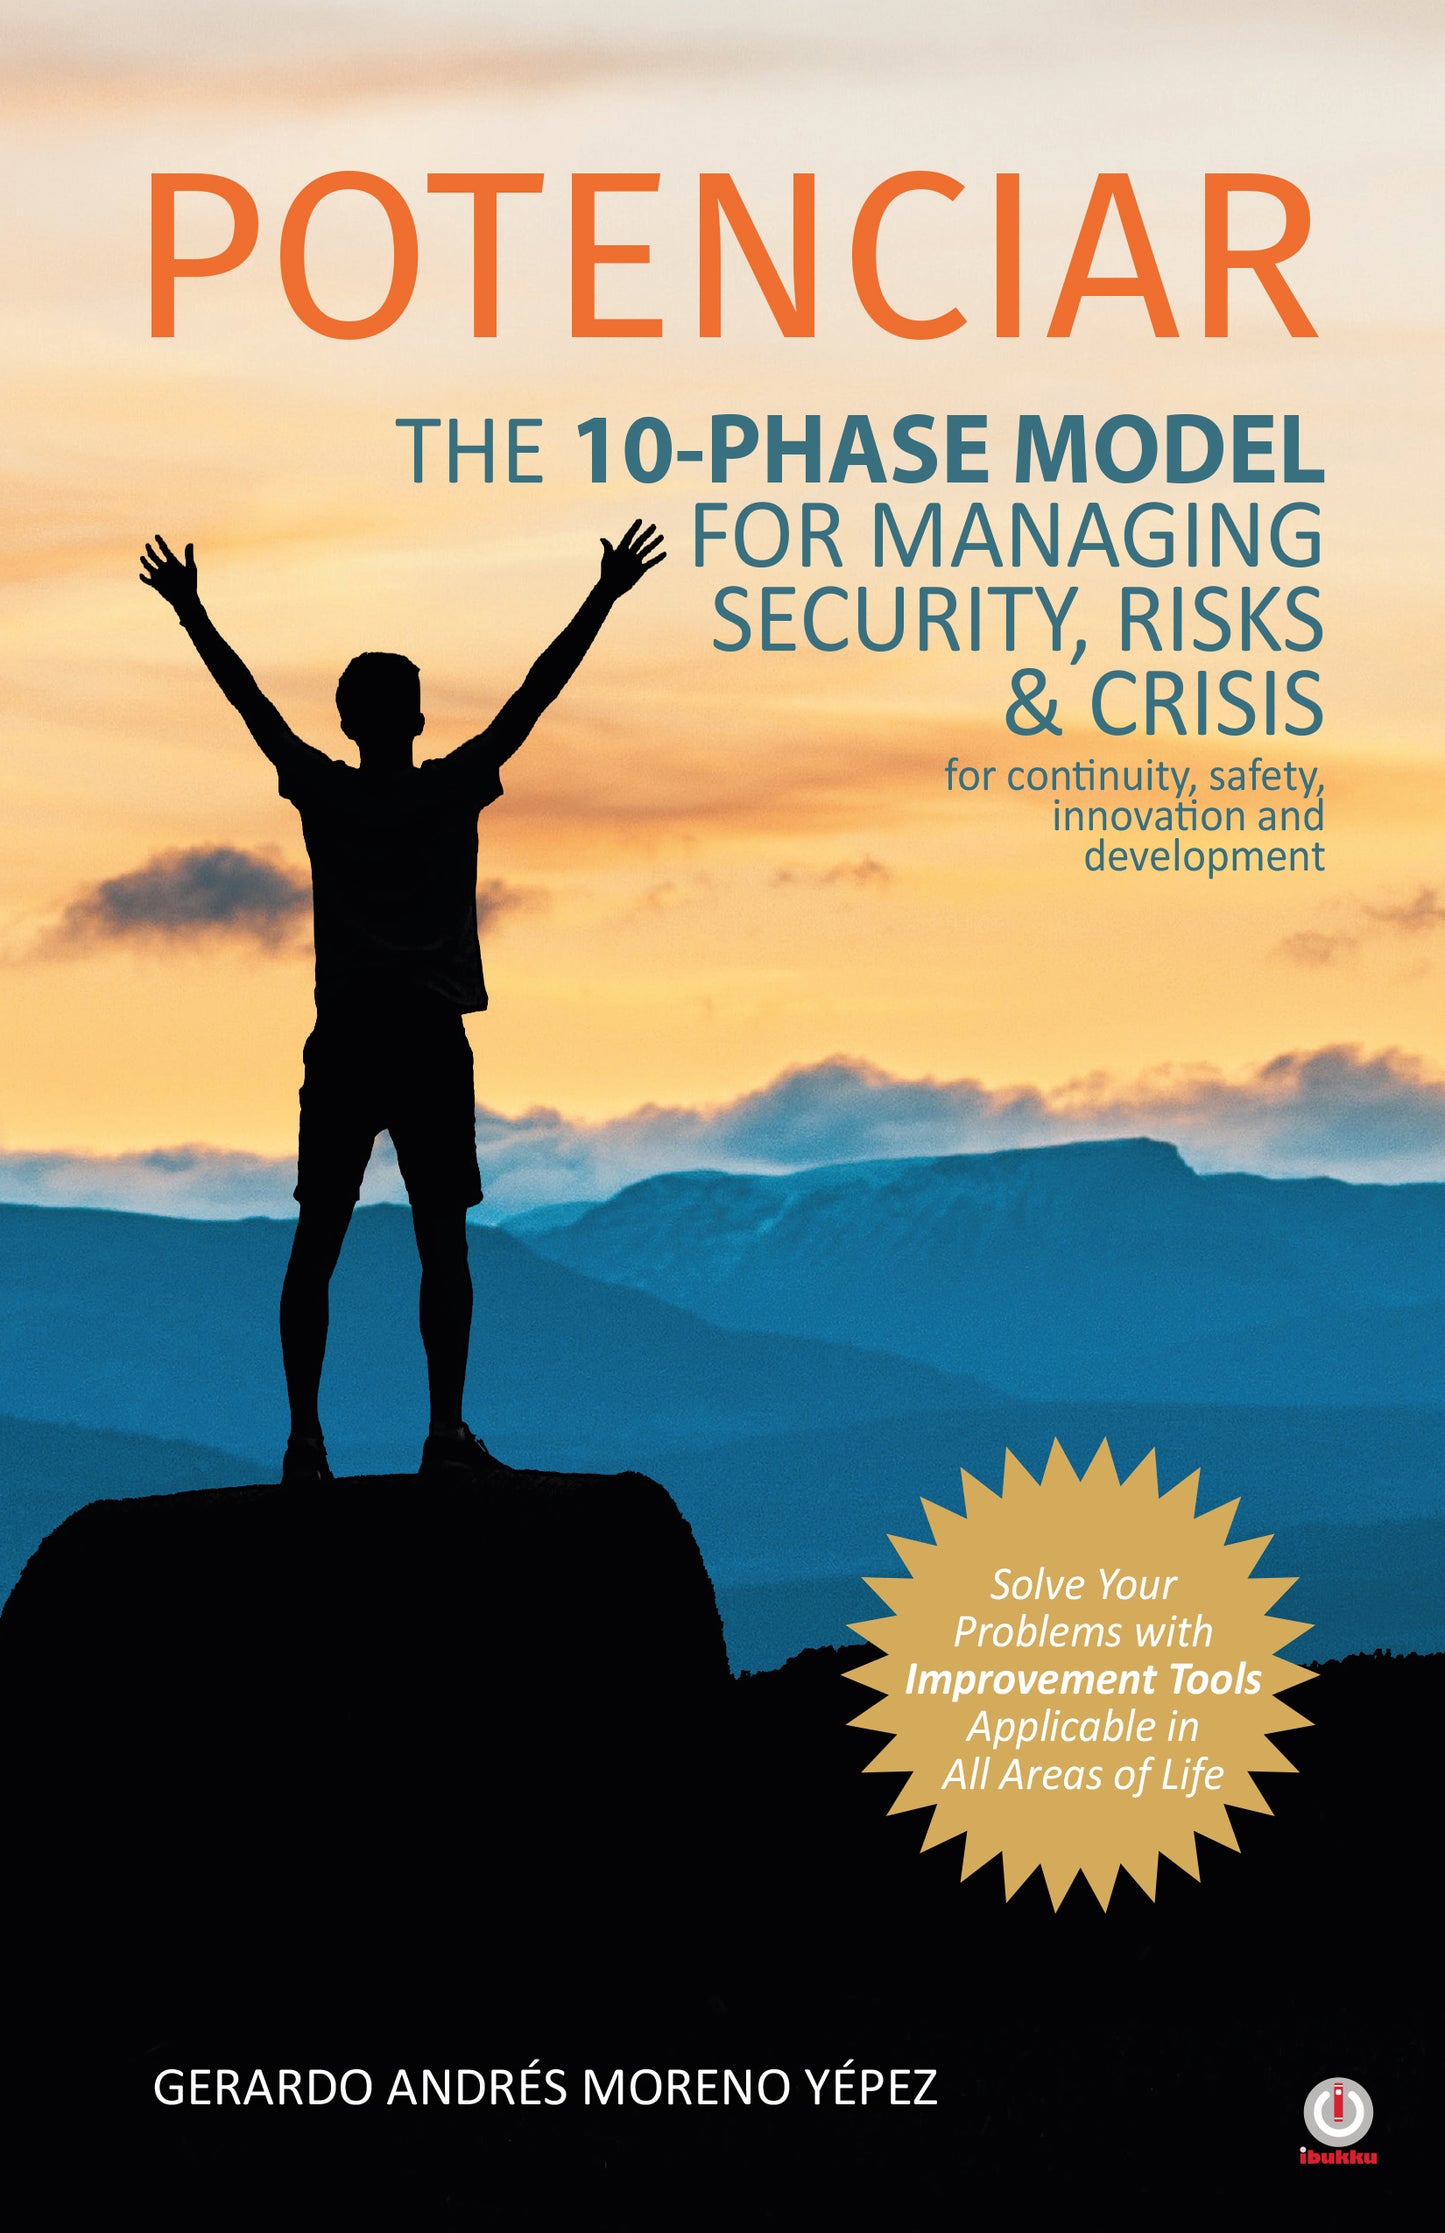 POTENCIAR: The 10-Phase Model For Managing Security, Risks & Crisis